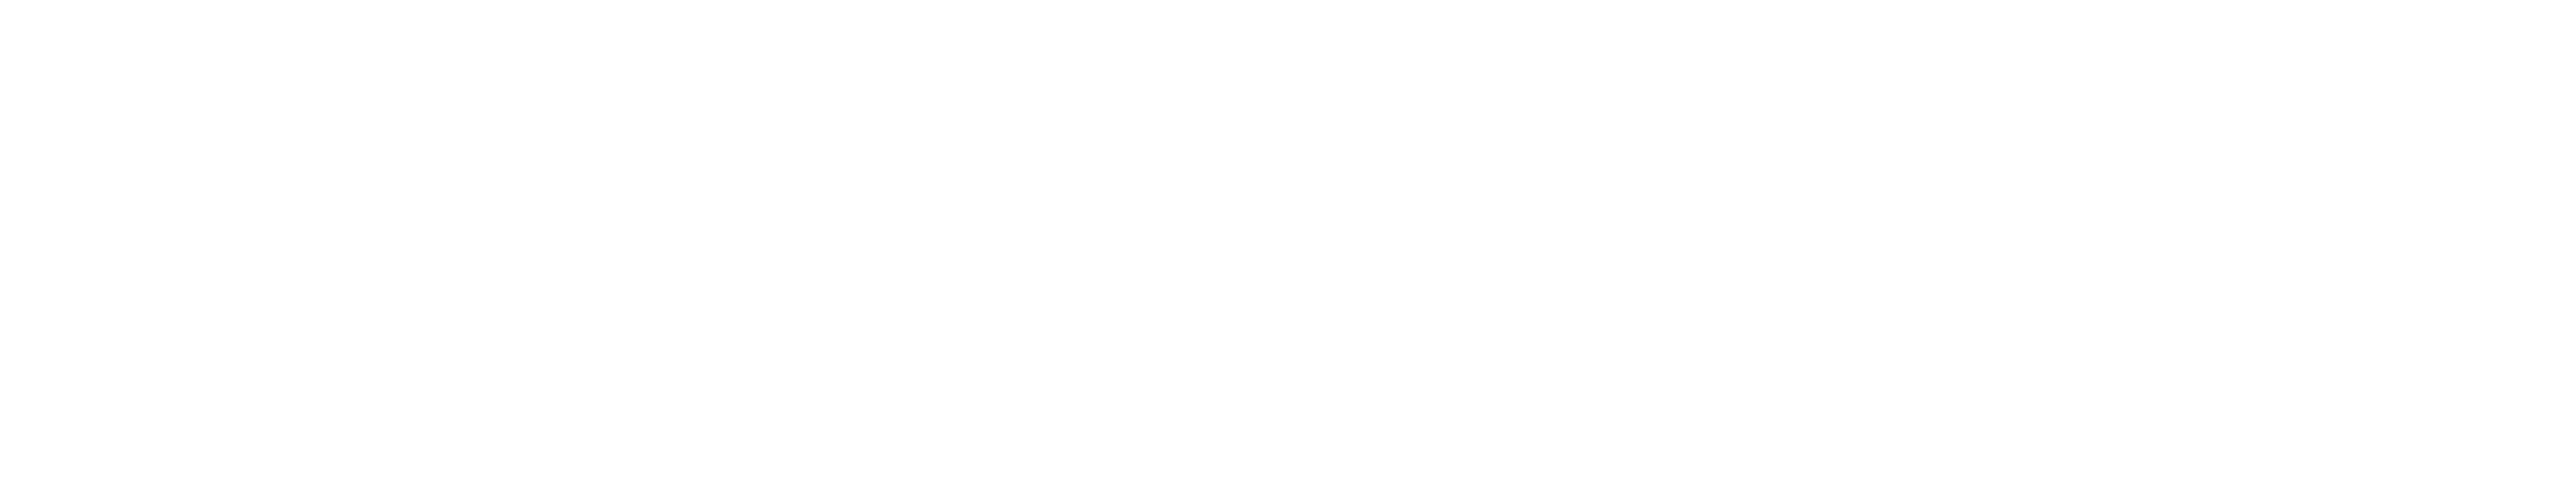 CEH hospitality and catering logo